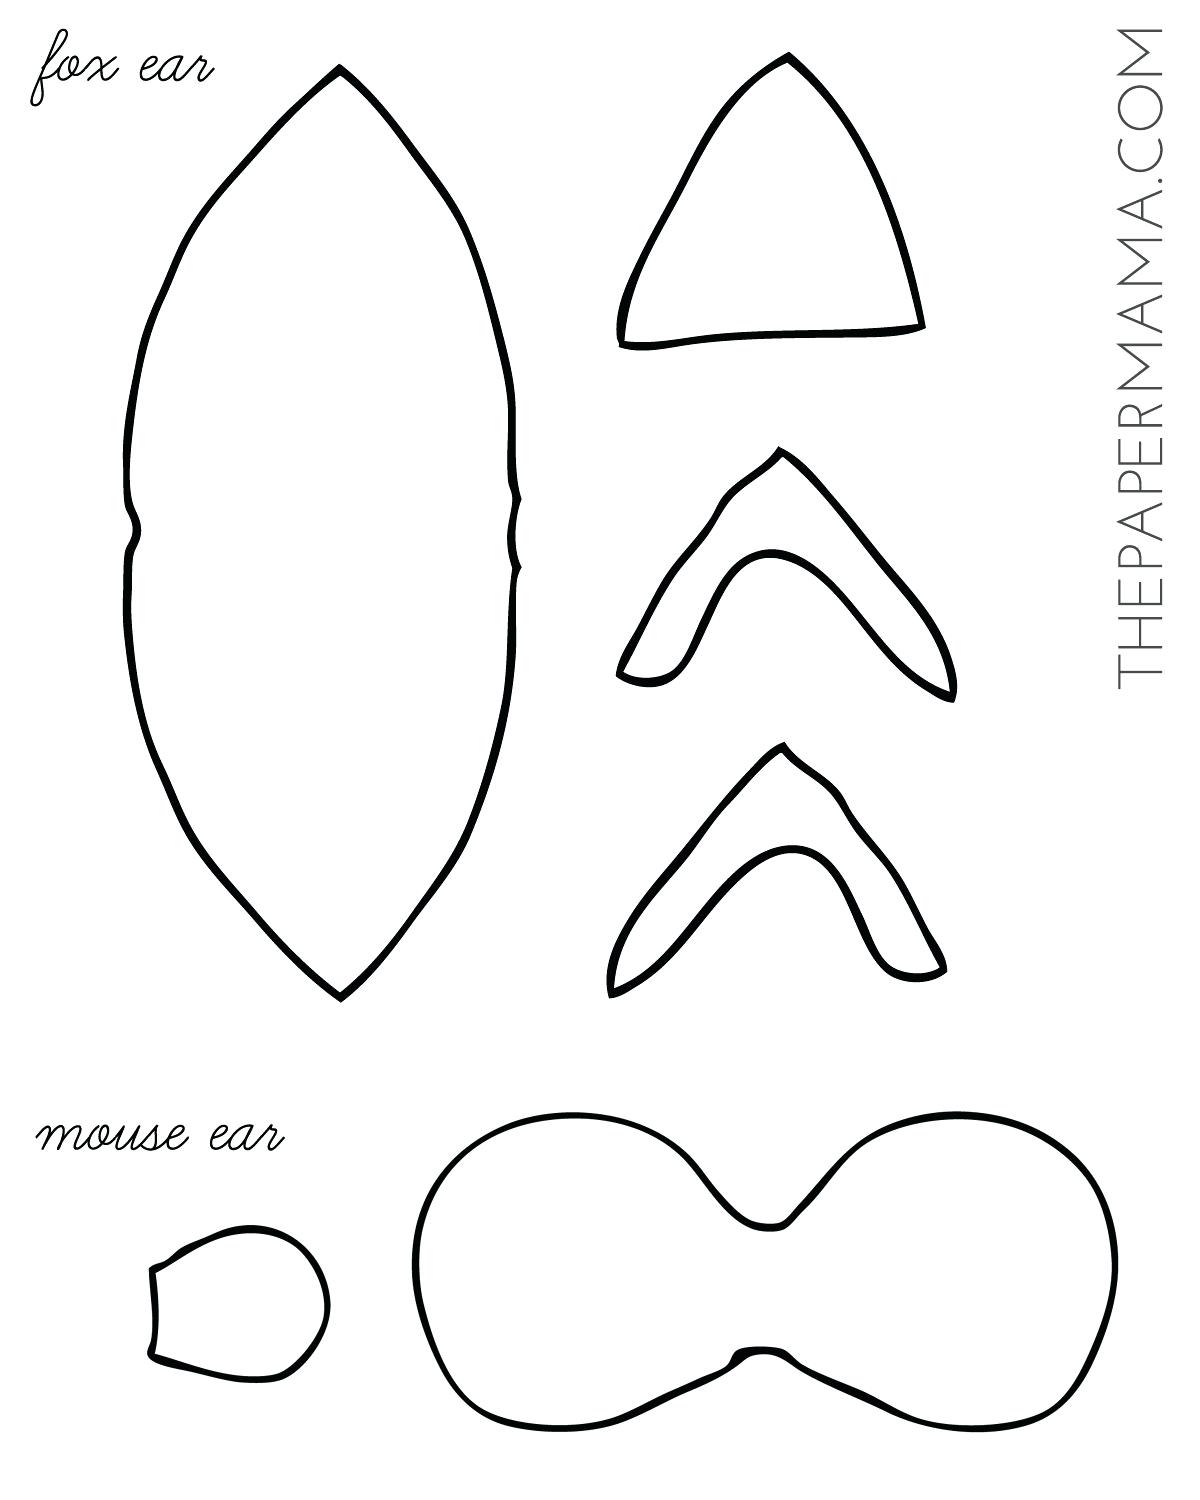 Printable Cow Ears All About Cow Photos